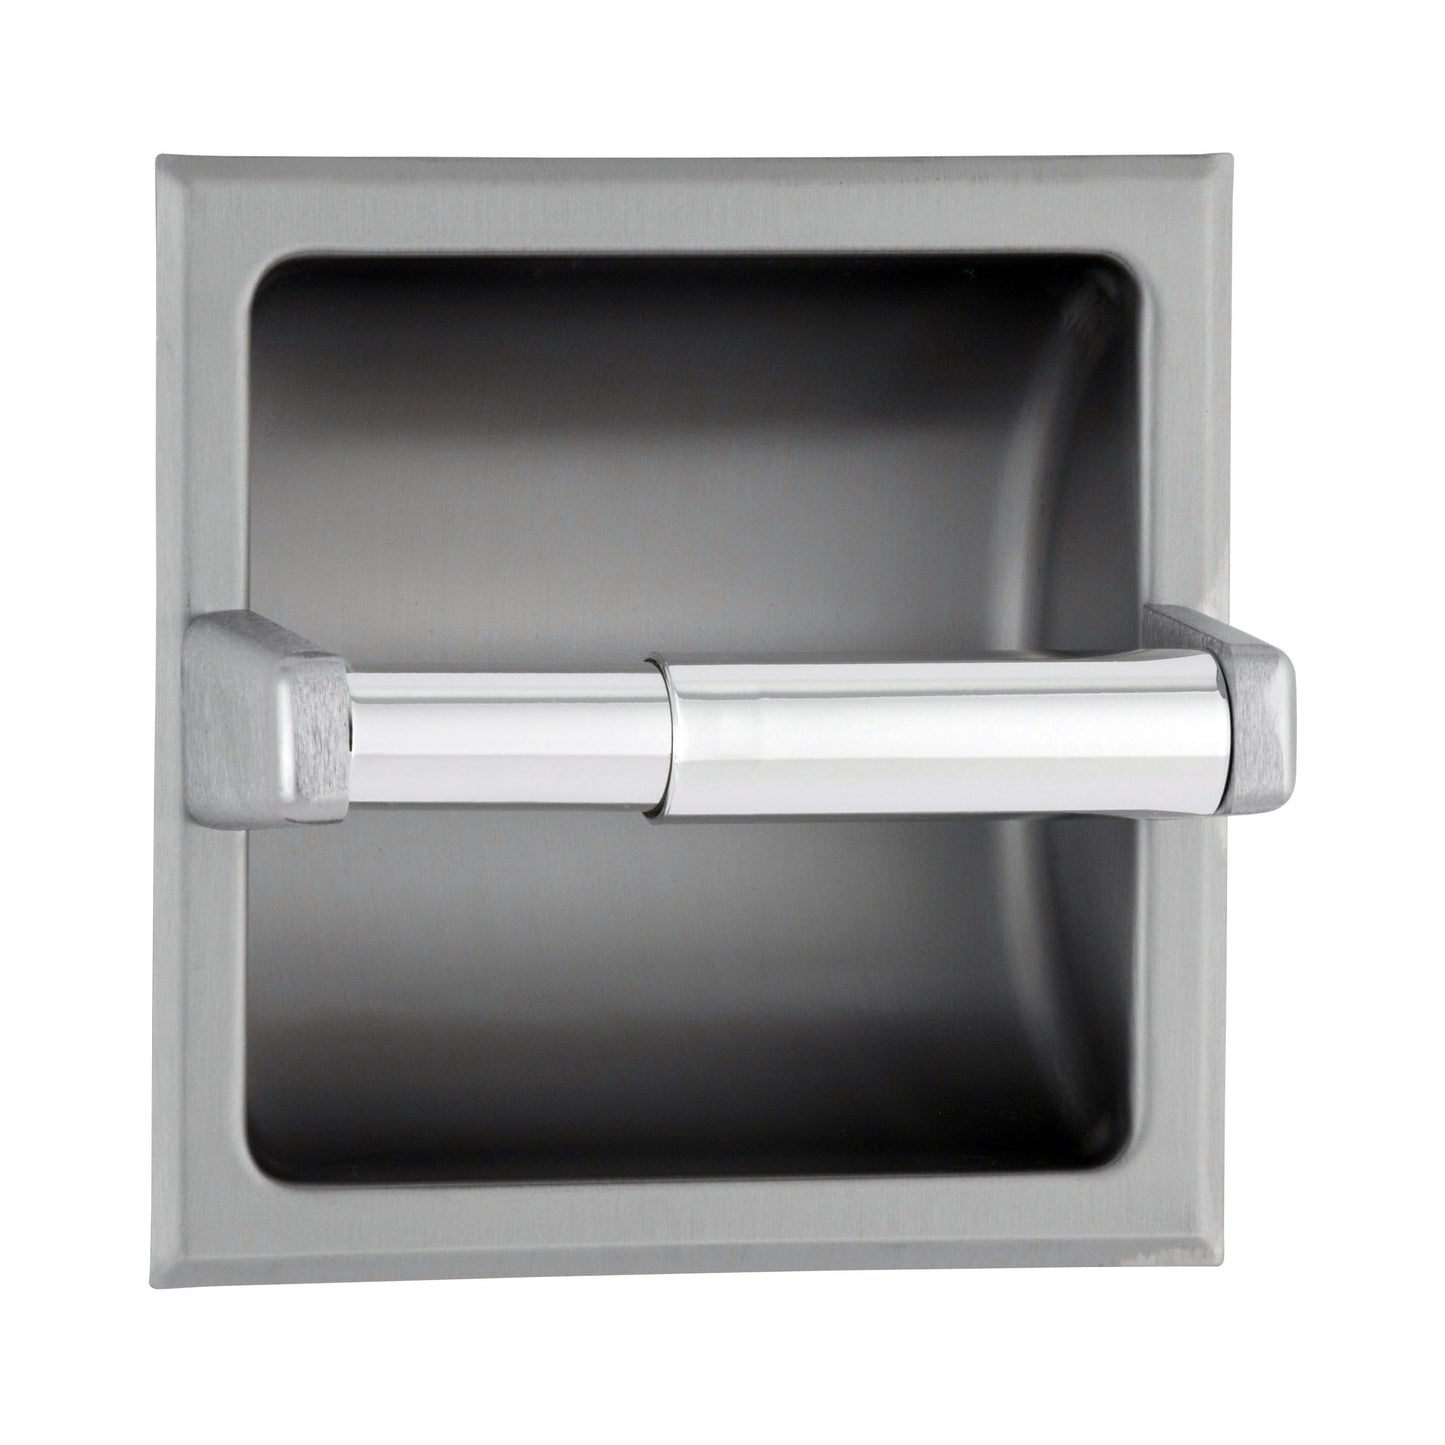 Bobrick 6677 - Recessed Toilet Tissue Dispenser in Polished Stainless Steel